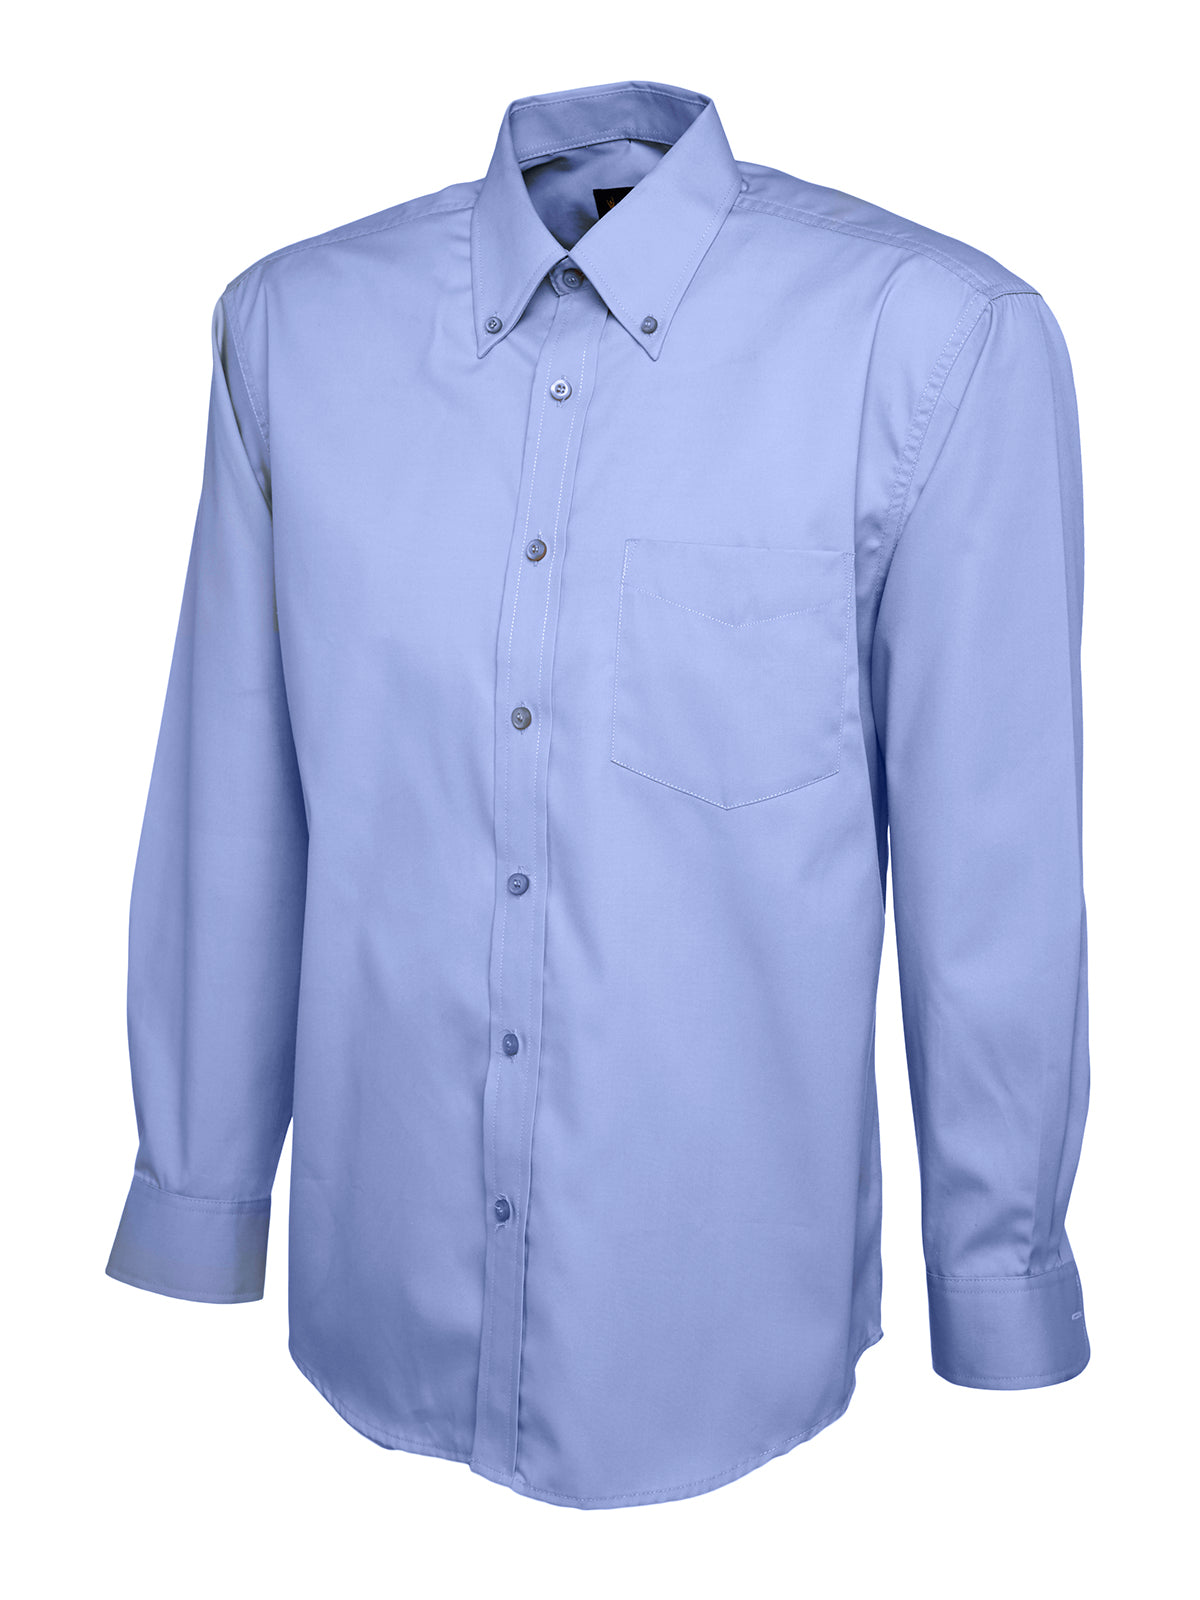 Uneek Mens Pinpoint Oxford Full Sleeve Shirt UC701 - Mid Blue